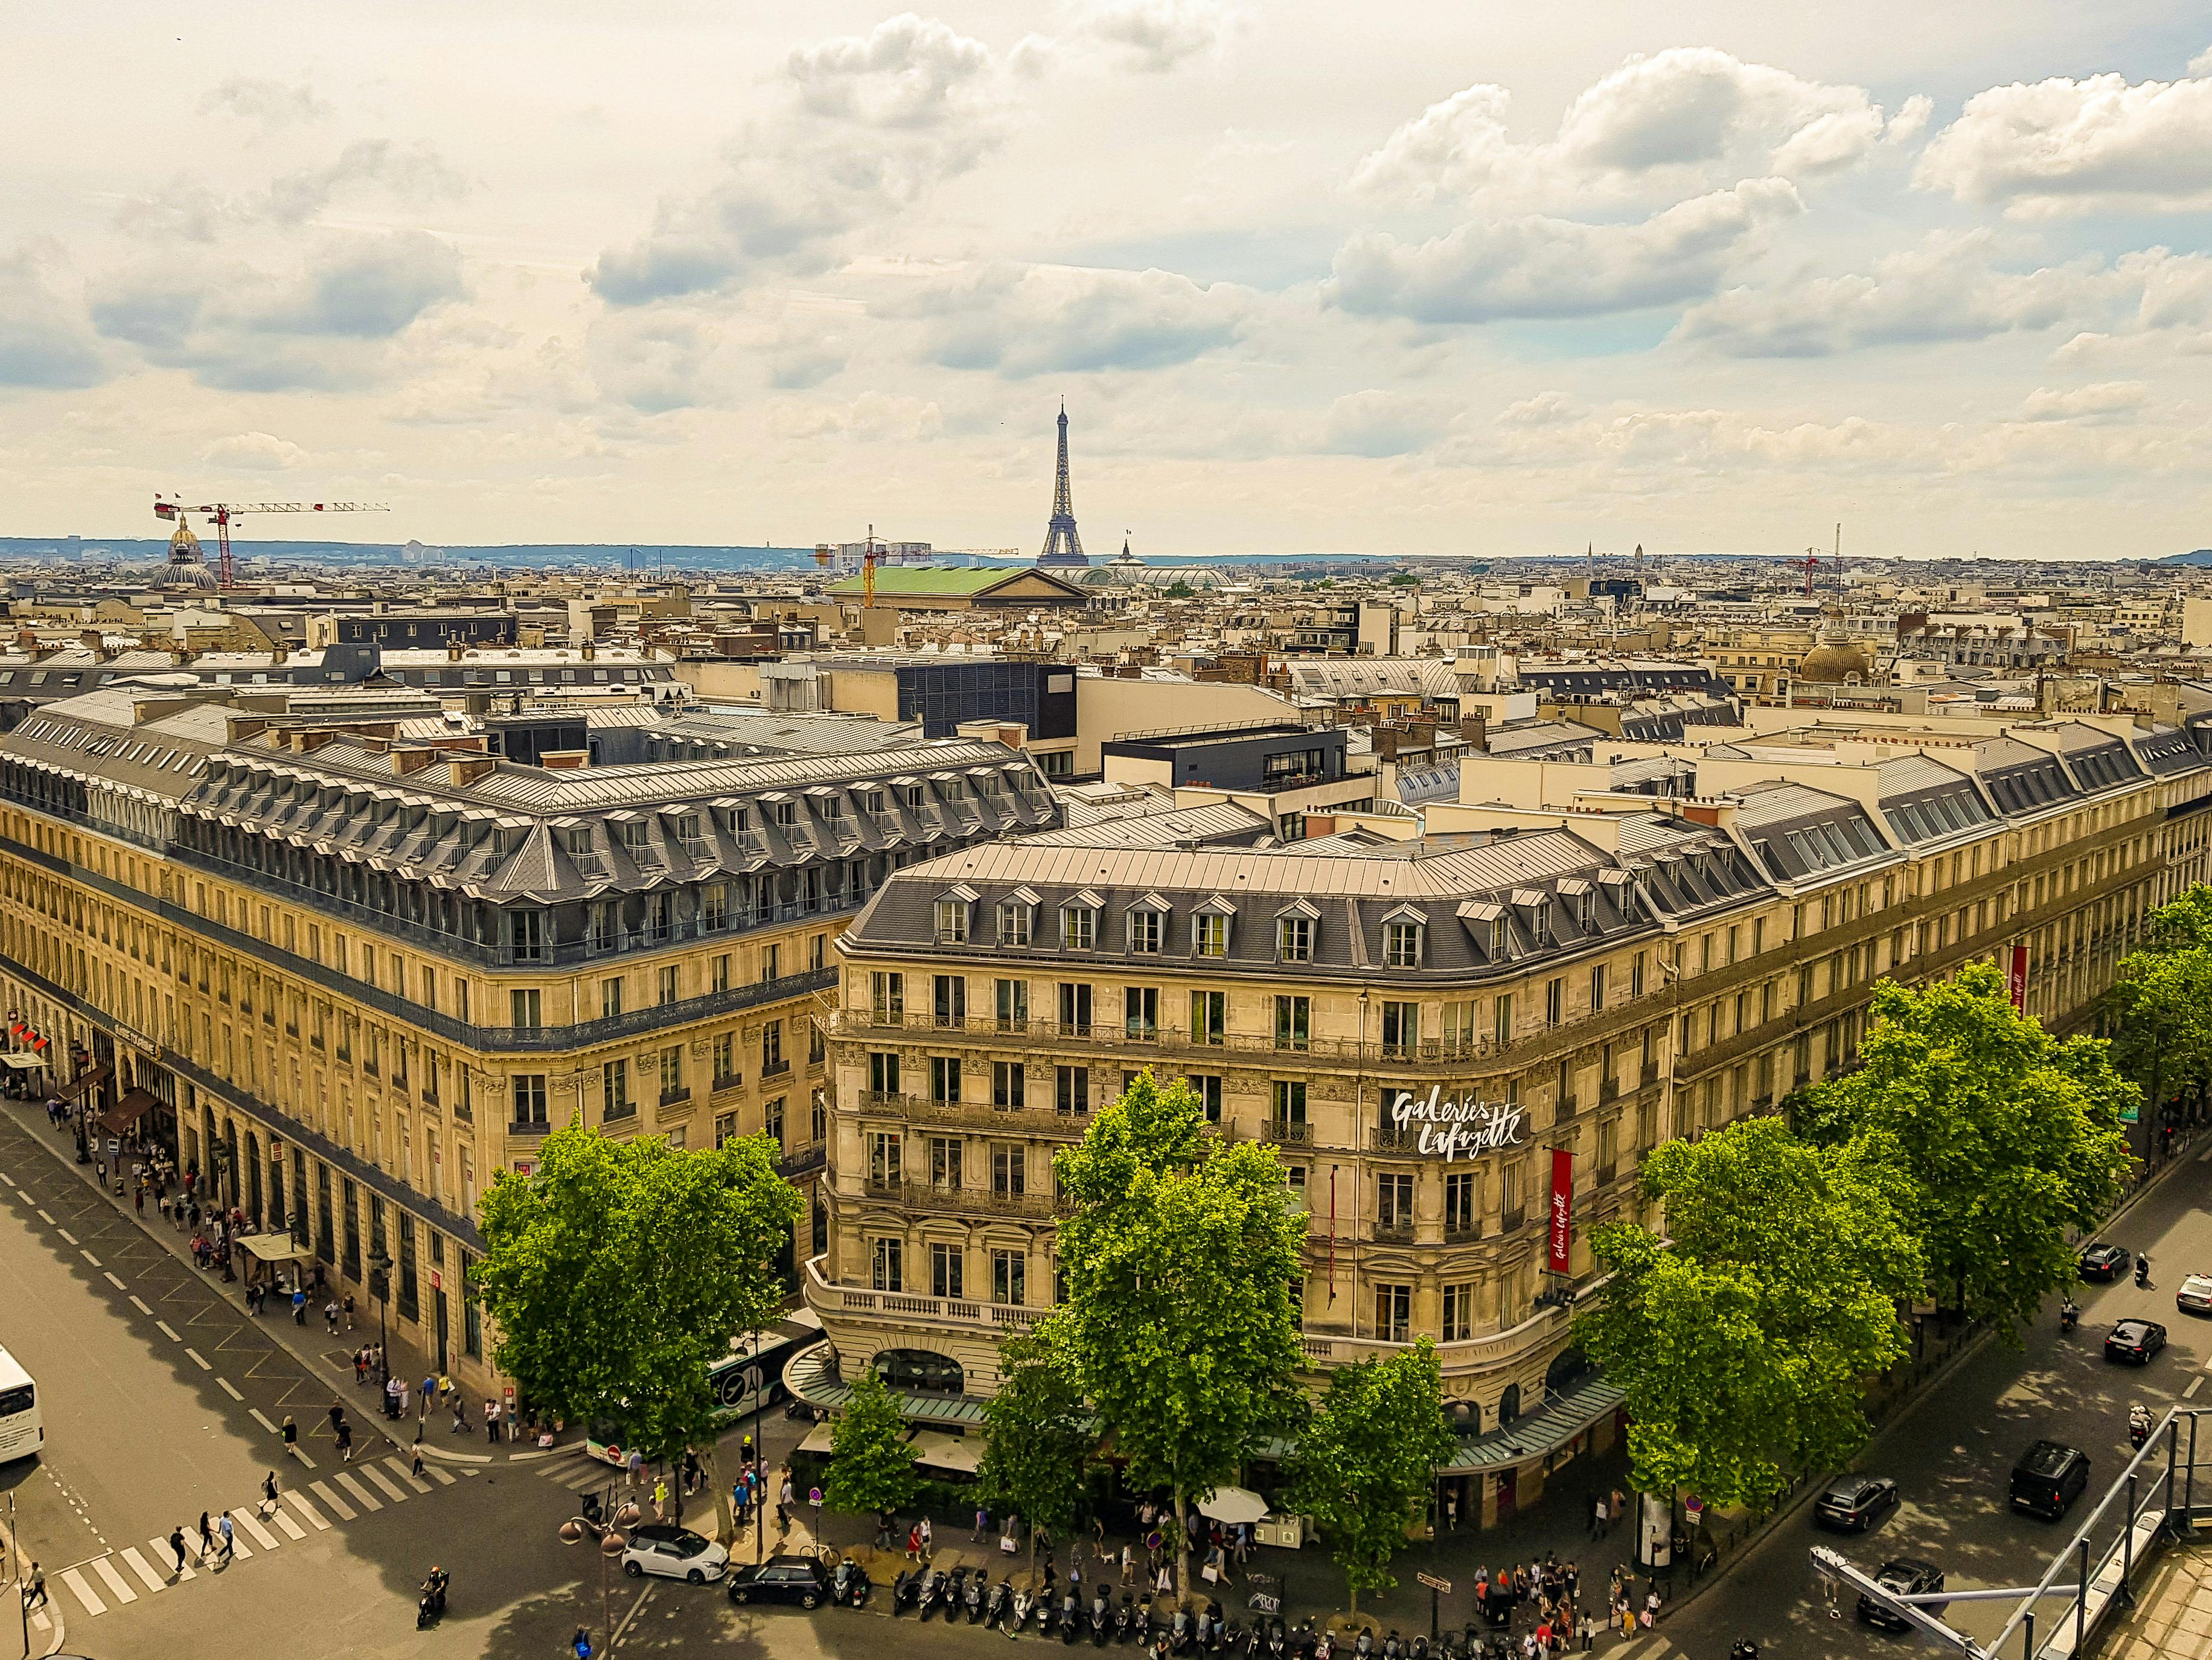 aerial view of galeries lafayette department store in paris france